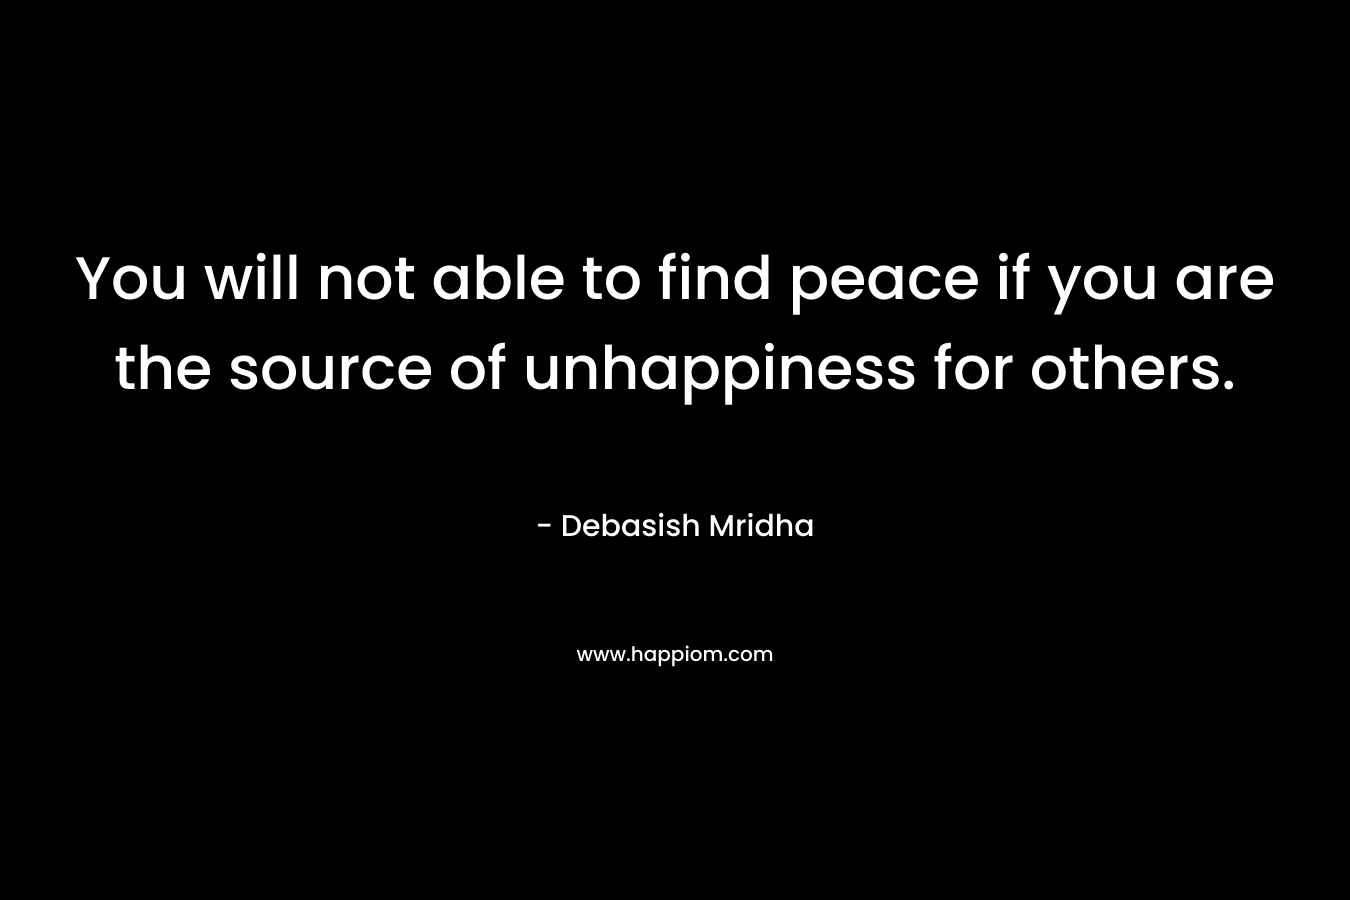 You will not able to find peace if you are the source of unhappiness for others.